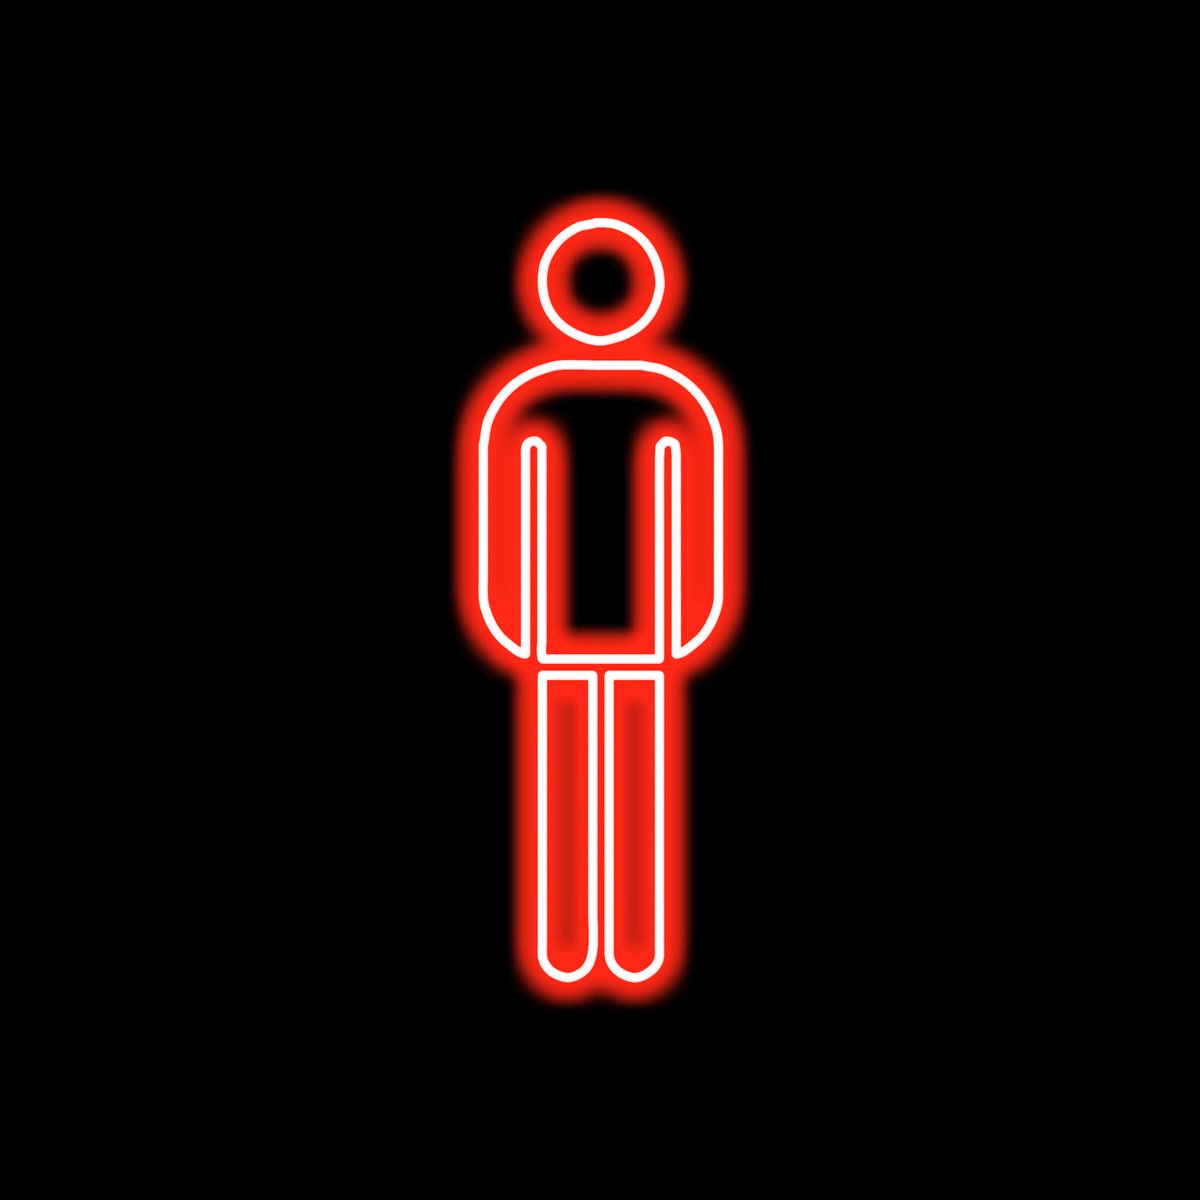 📢 SOLD 

@MetaMushrooms has snatched an Ampelmännchen (Pedestrian Signal). 🥳🎉 Thank you very much my dear friend! 🙏🫂

So that it doesn't get lonely, I've sent you a second one. 
LFG! my friend ✊️

🟩 LFG!
🟥 Do not Walk!